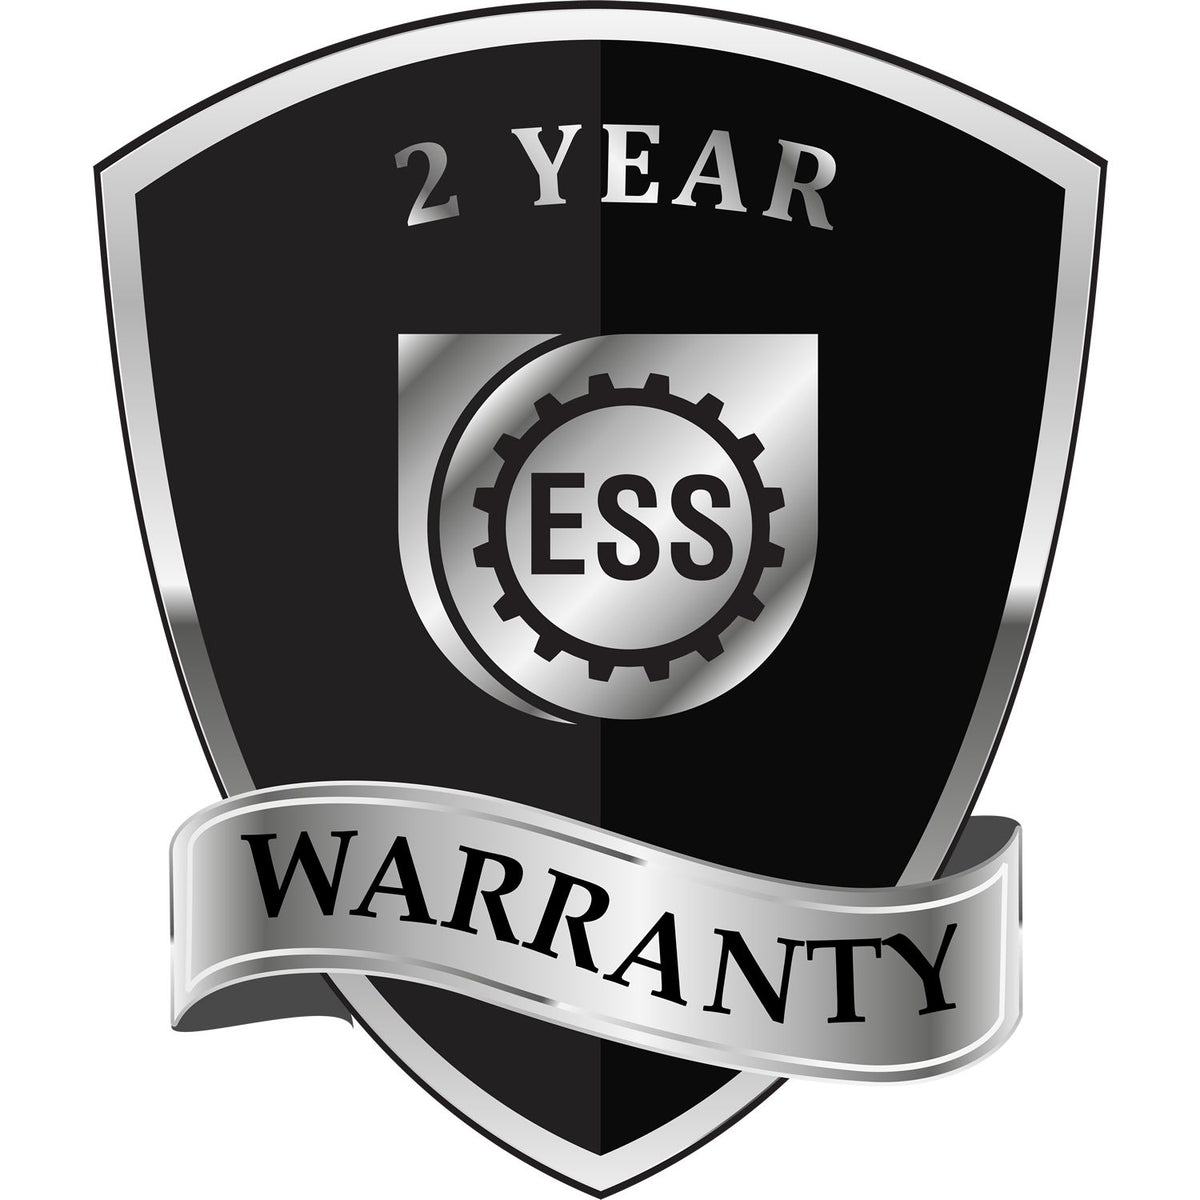 A black and silver badge or emblem showing warranty information for the Hybrid Indiana Engineer Seal